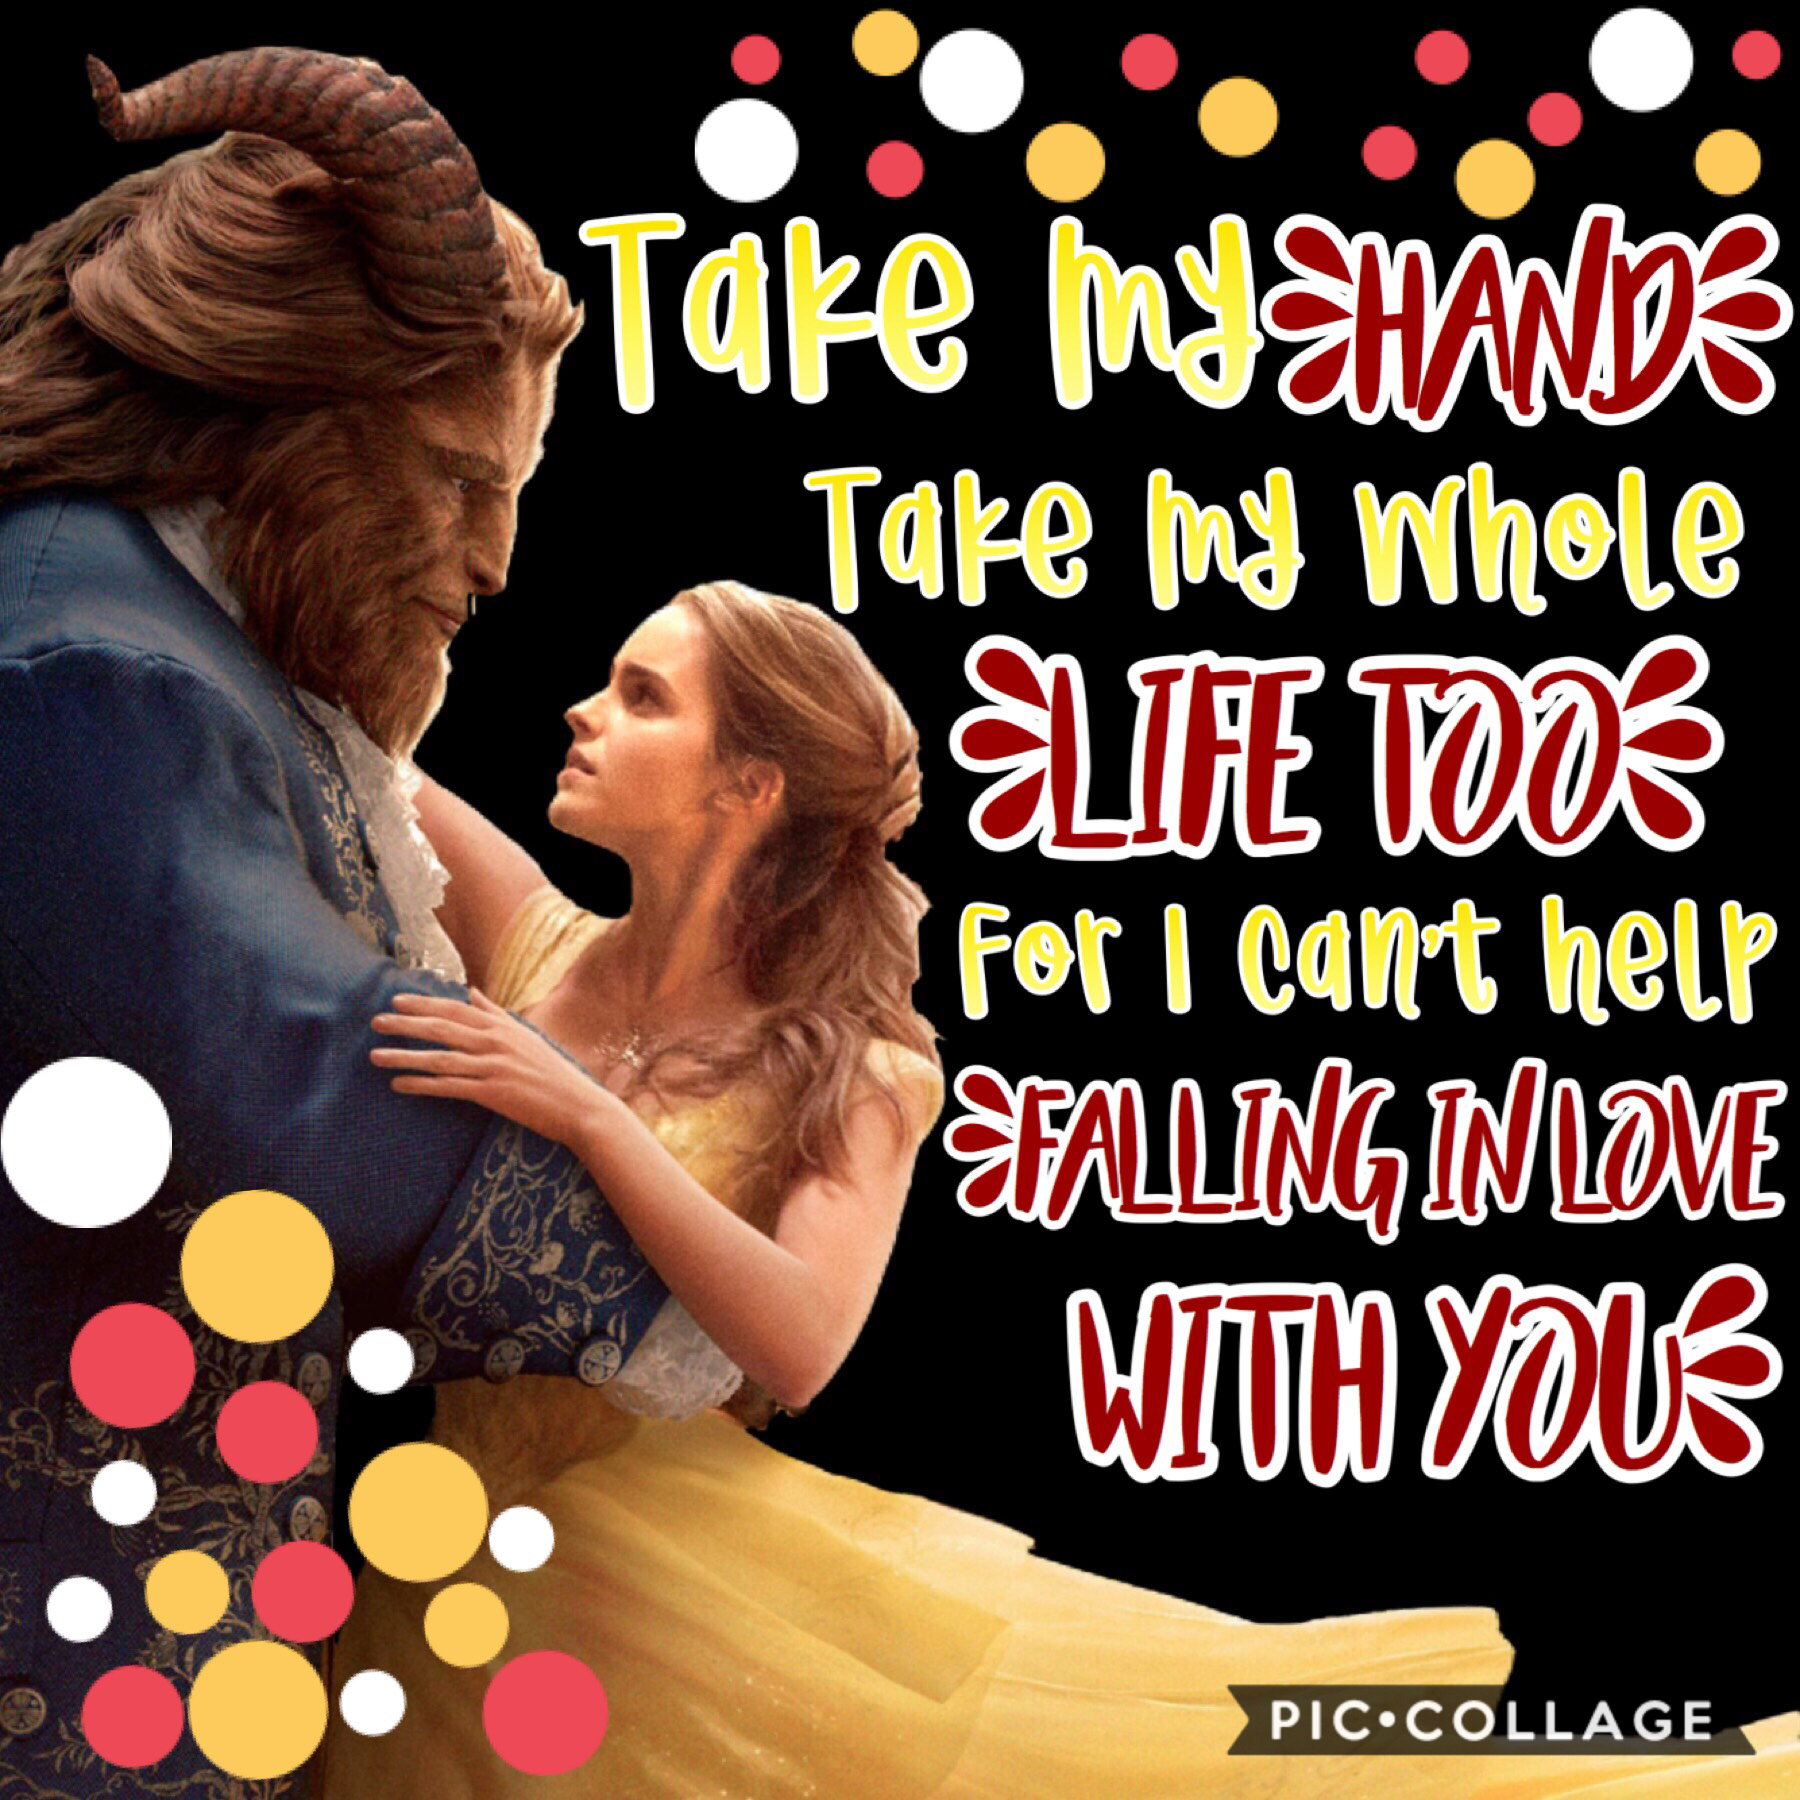 For a contest. (Tappy plzz)
Rate /10. Ik the song doesn’t match the movie😂. 
Qotd: what’s your favorite song from beauty and the beast? 